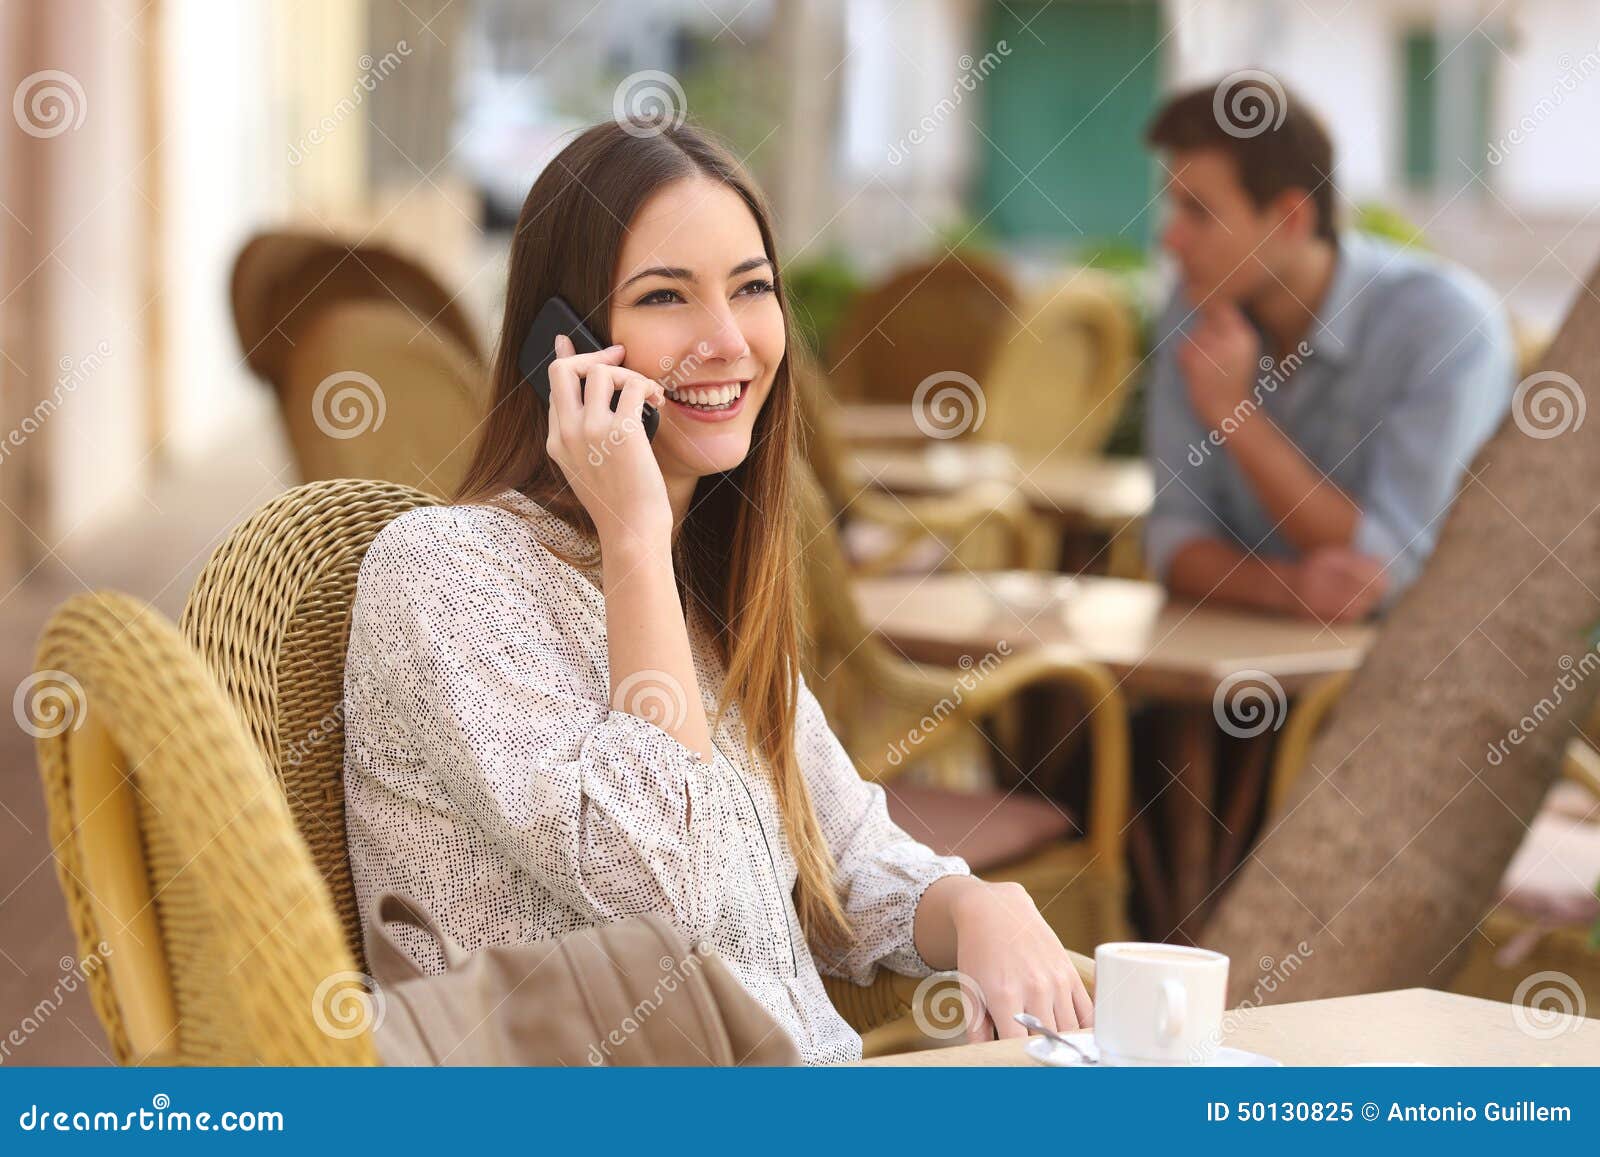 happy woman calling on the phone in a restaurant